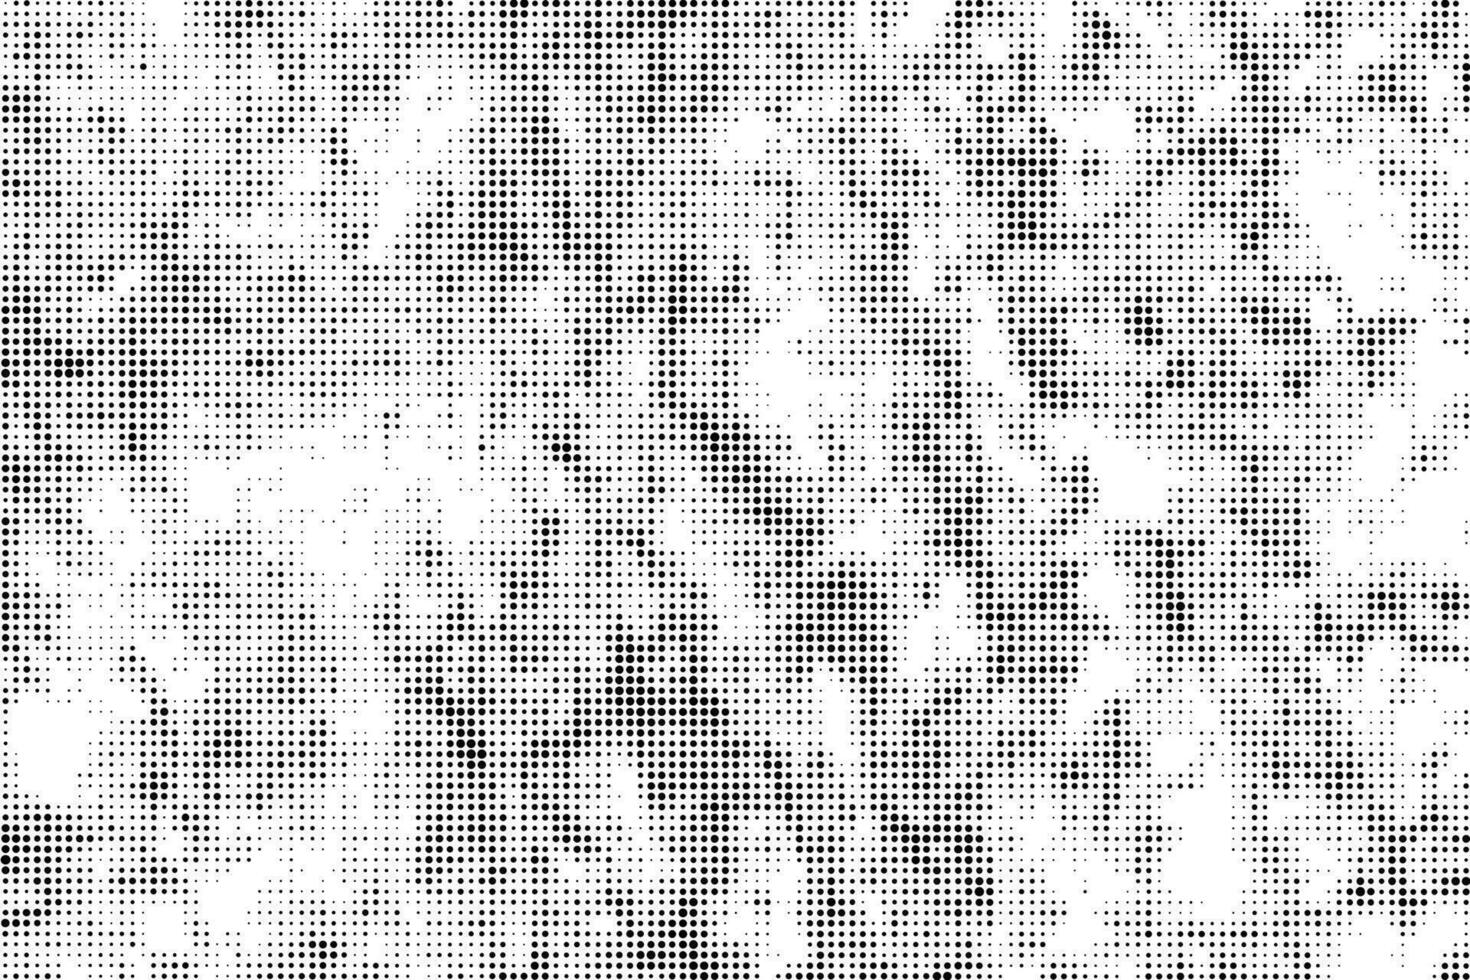 Vector blach dots pattern. Abstract halftone texture on white background.